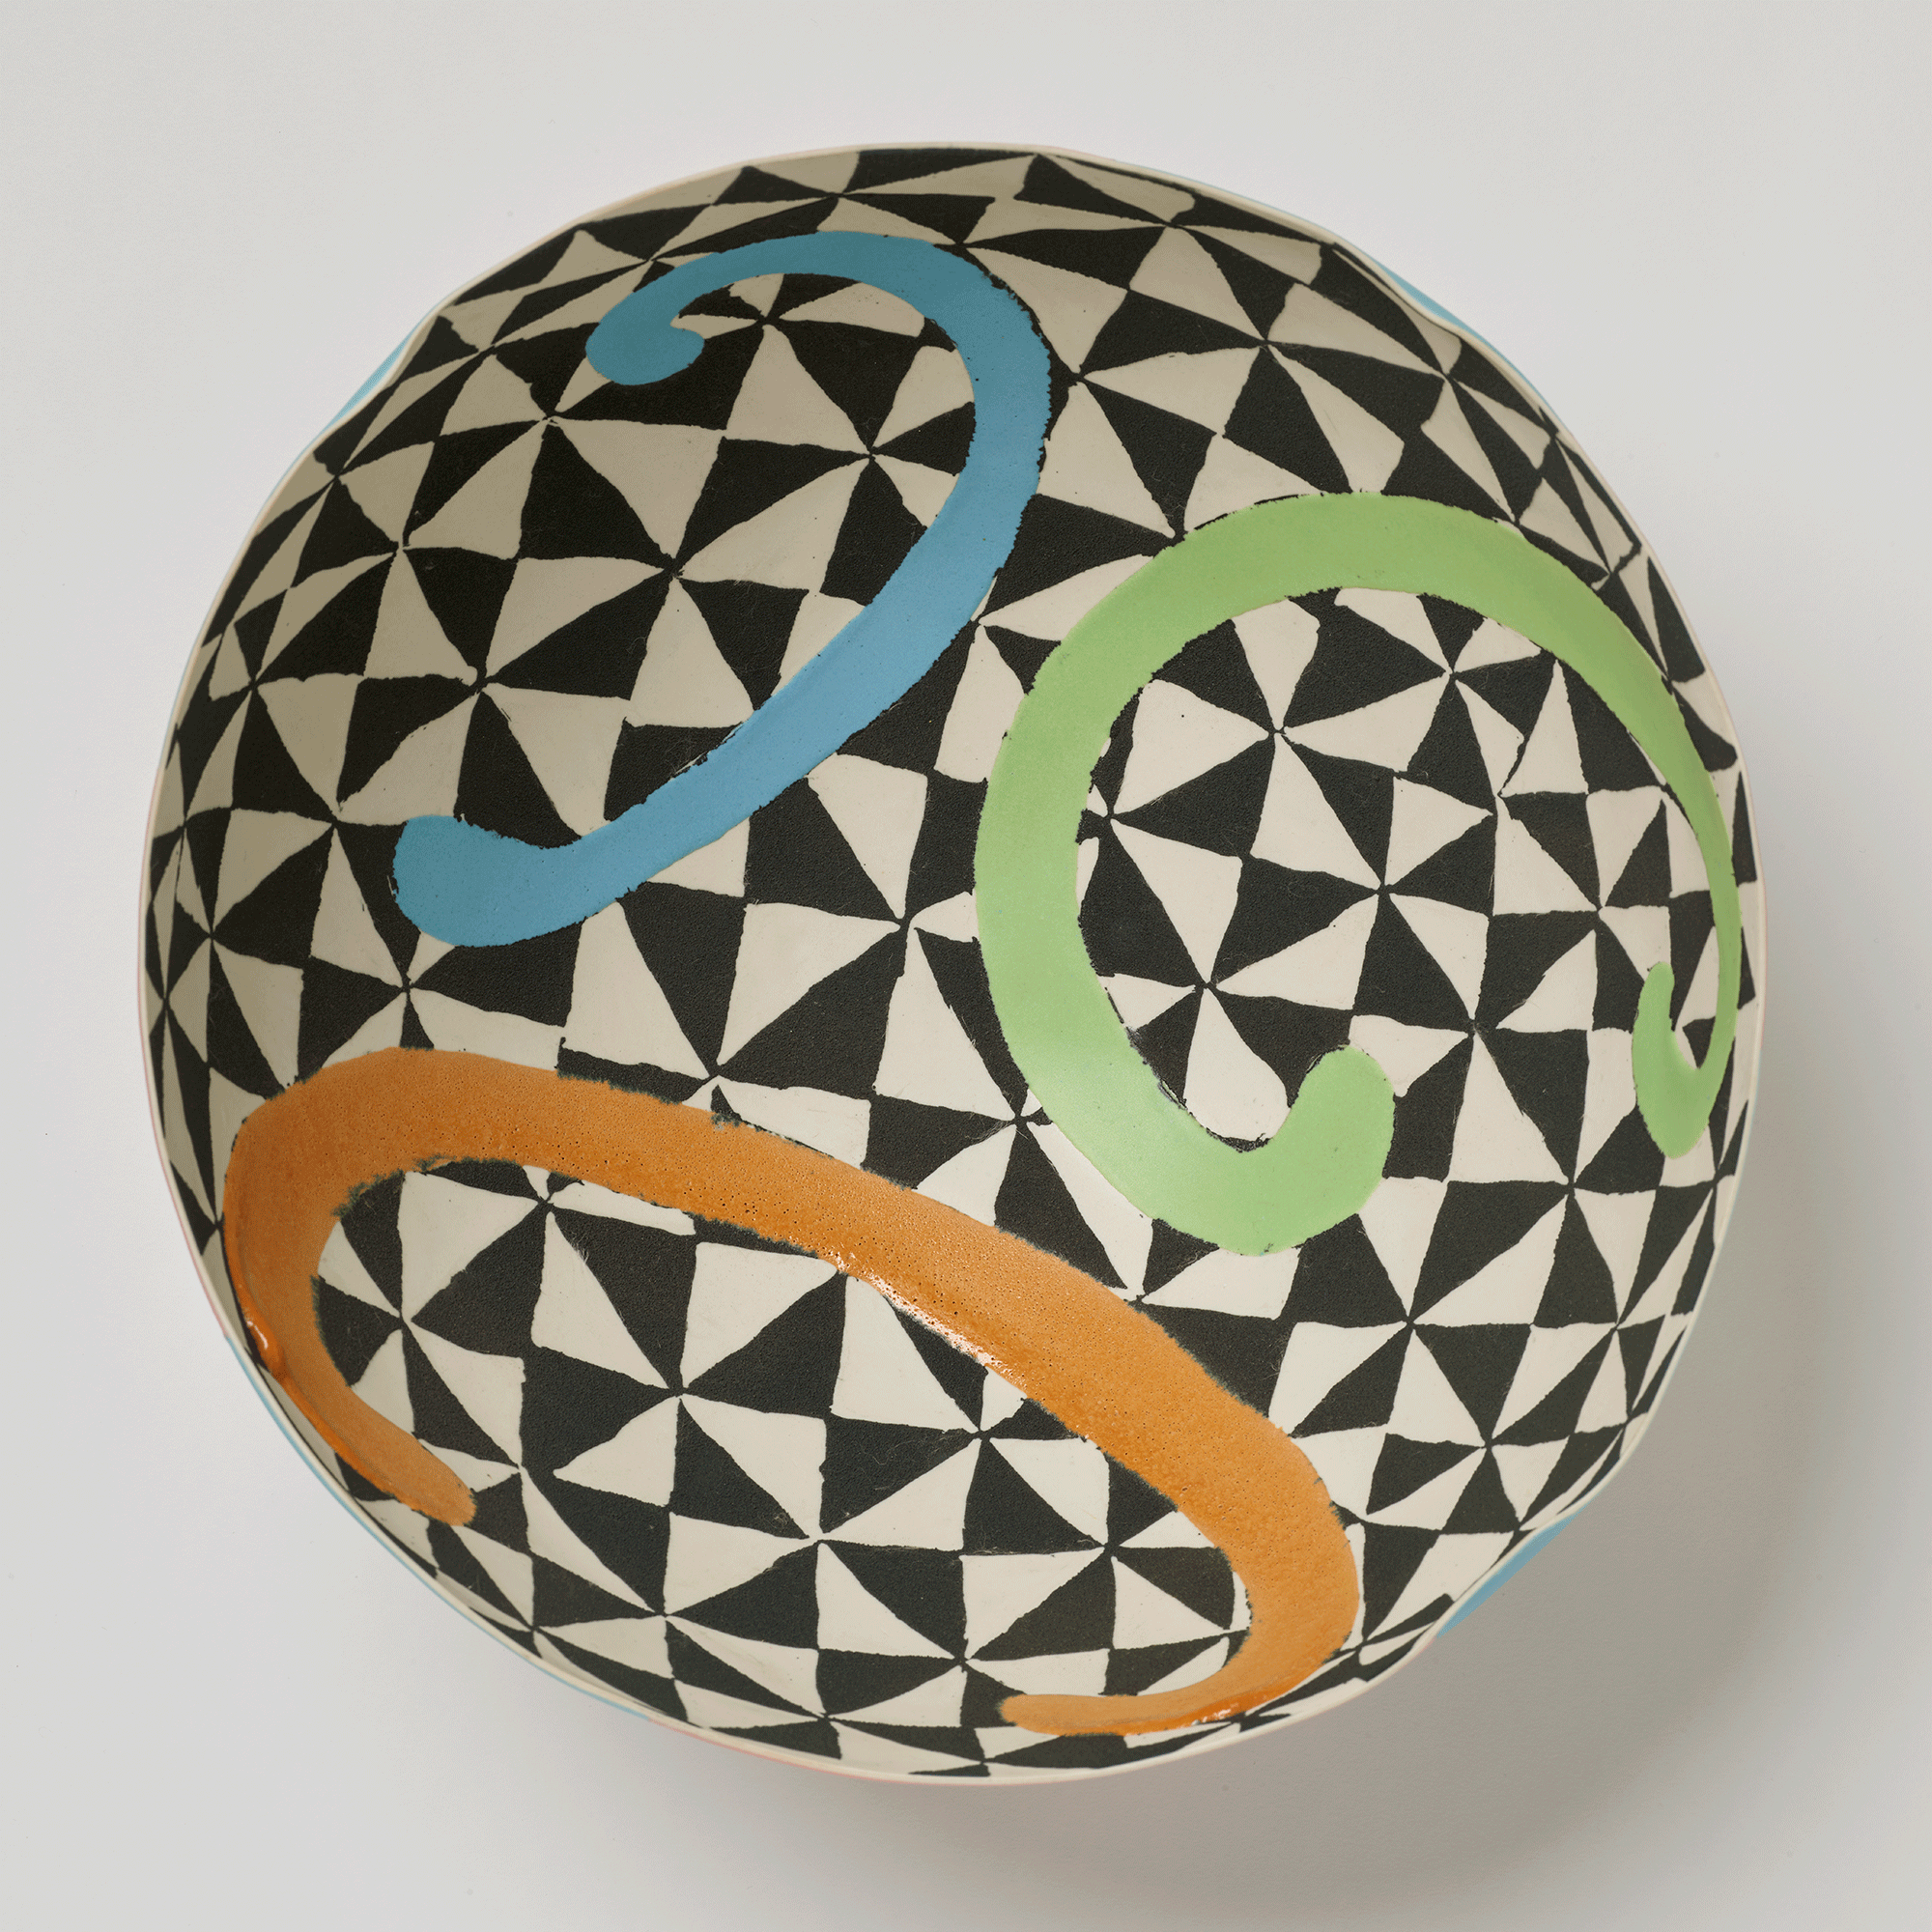 Interior view of bowl. Black and white geometric designs with three C-shapes on top in blue, green, and orange.